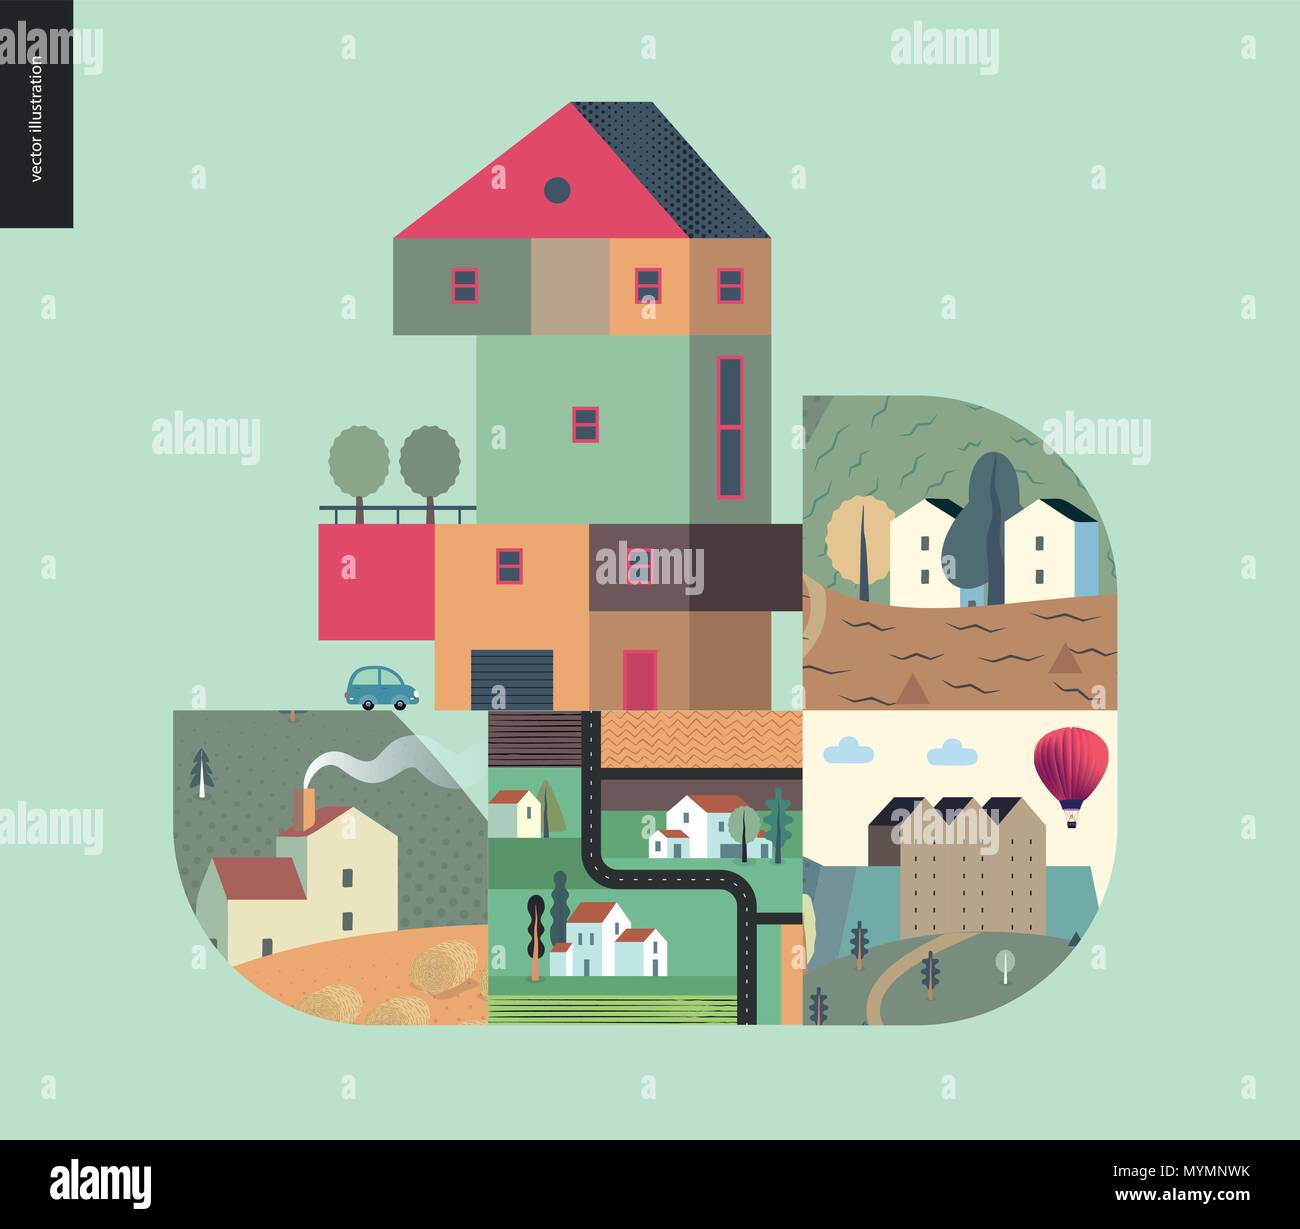 Simple things - houses - flat cartoon vector illustration of countryside house, isolated building, tower, treehouse with ladder, row of townhouses, to Stock Vector